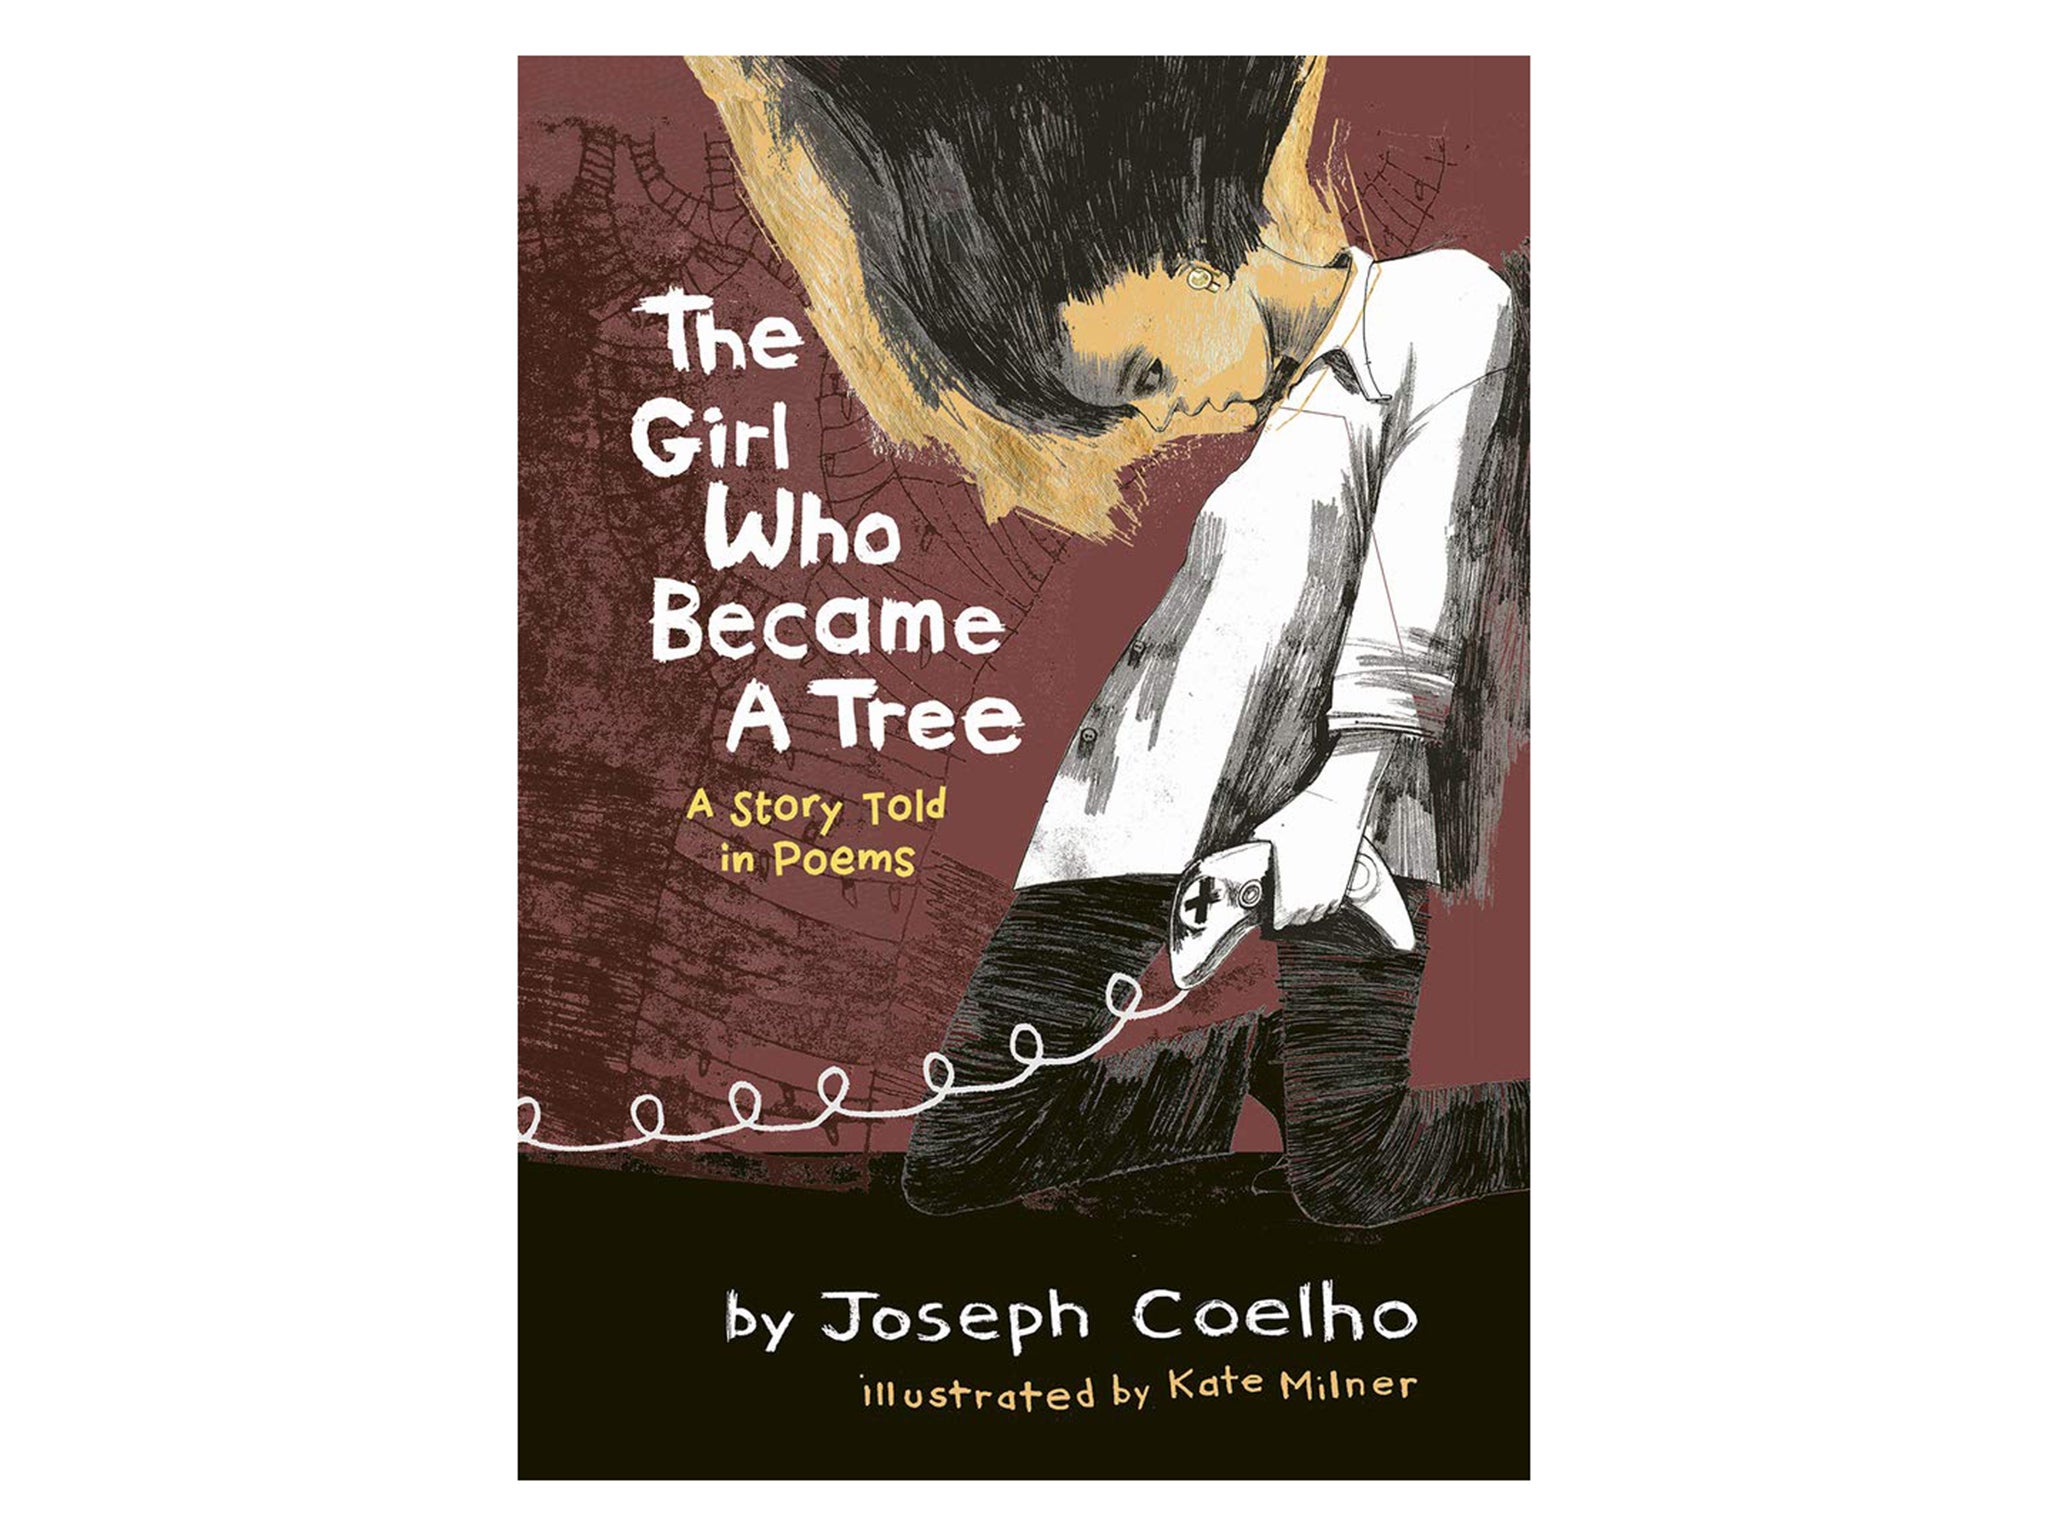 the-girl-who-became-a-tree-joseph-coelho-carneige-medal-2021-longlist-indybest.jpg